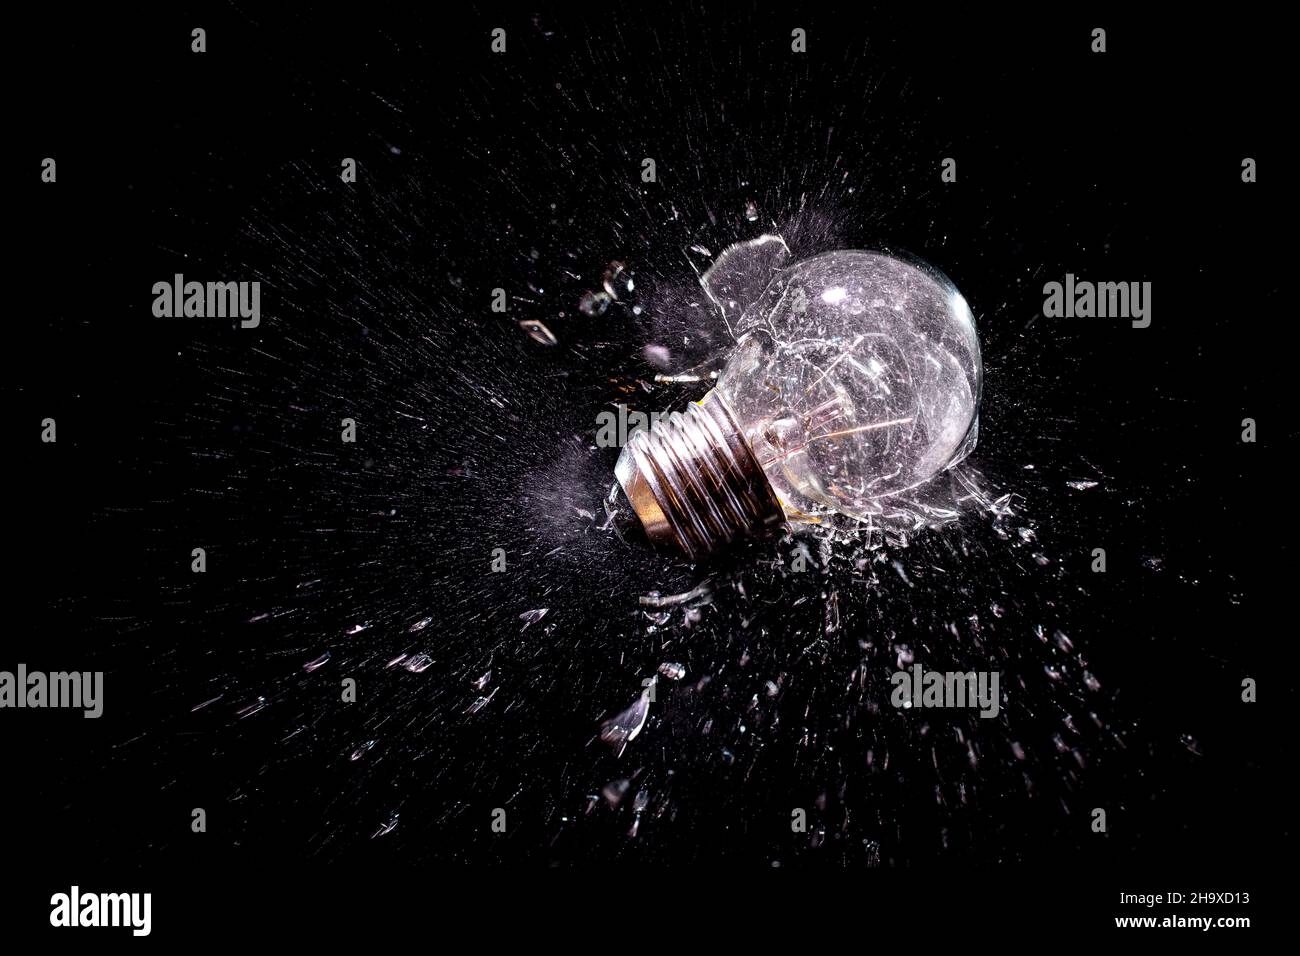 moment of impact explosion of a traditional light bulb on a black background. Stock Photo